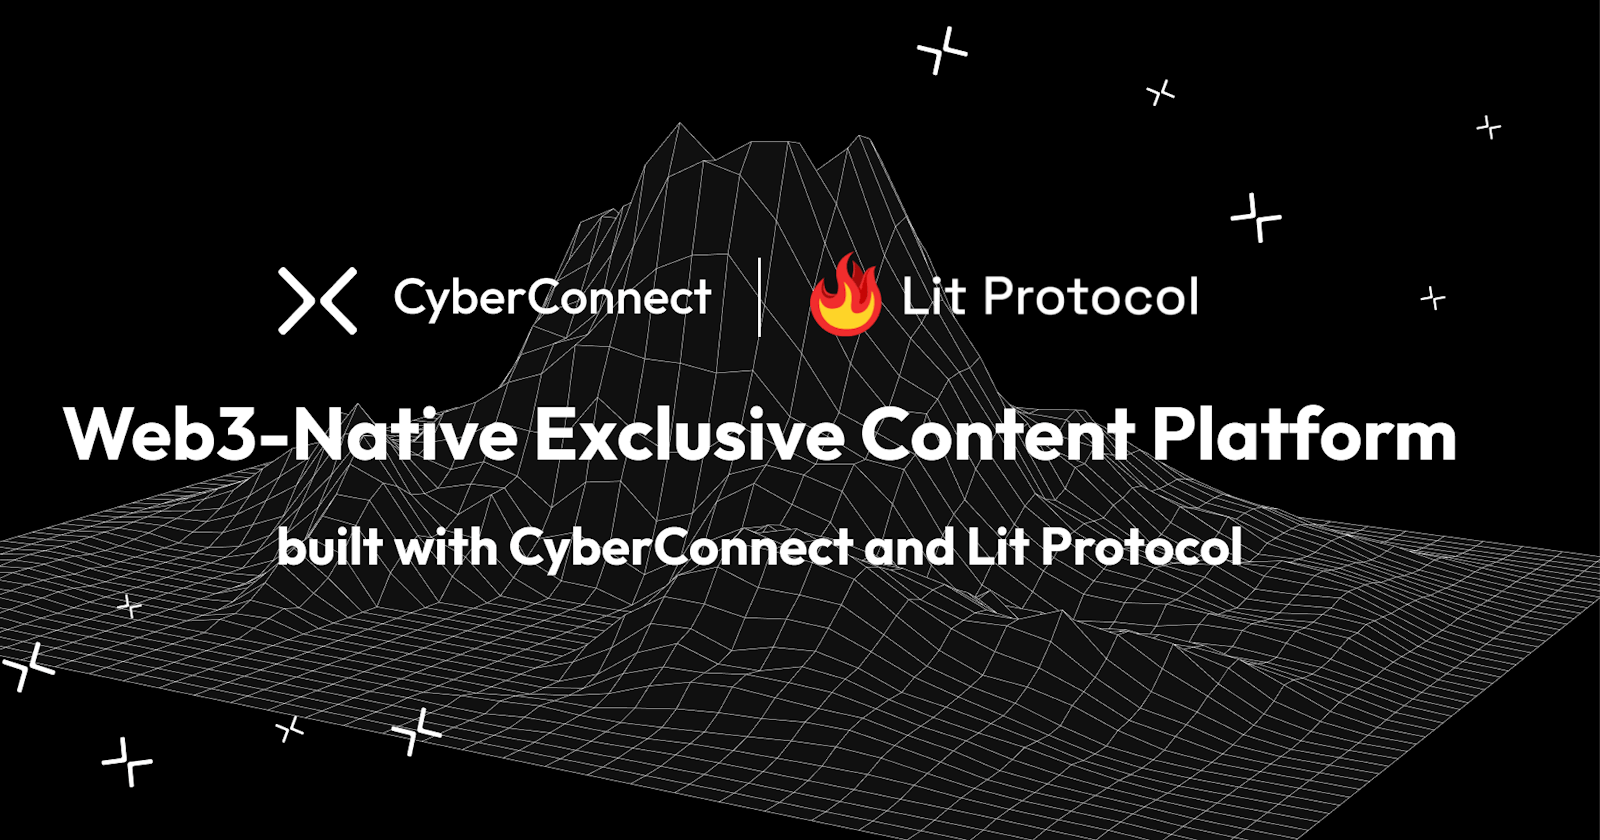 Web3-Native Exclusive Content Platform built with CyberConnect and Lit Protocol